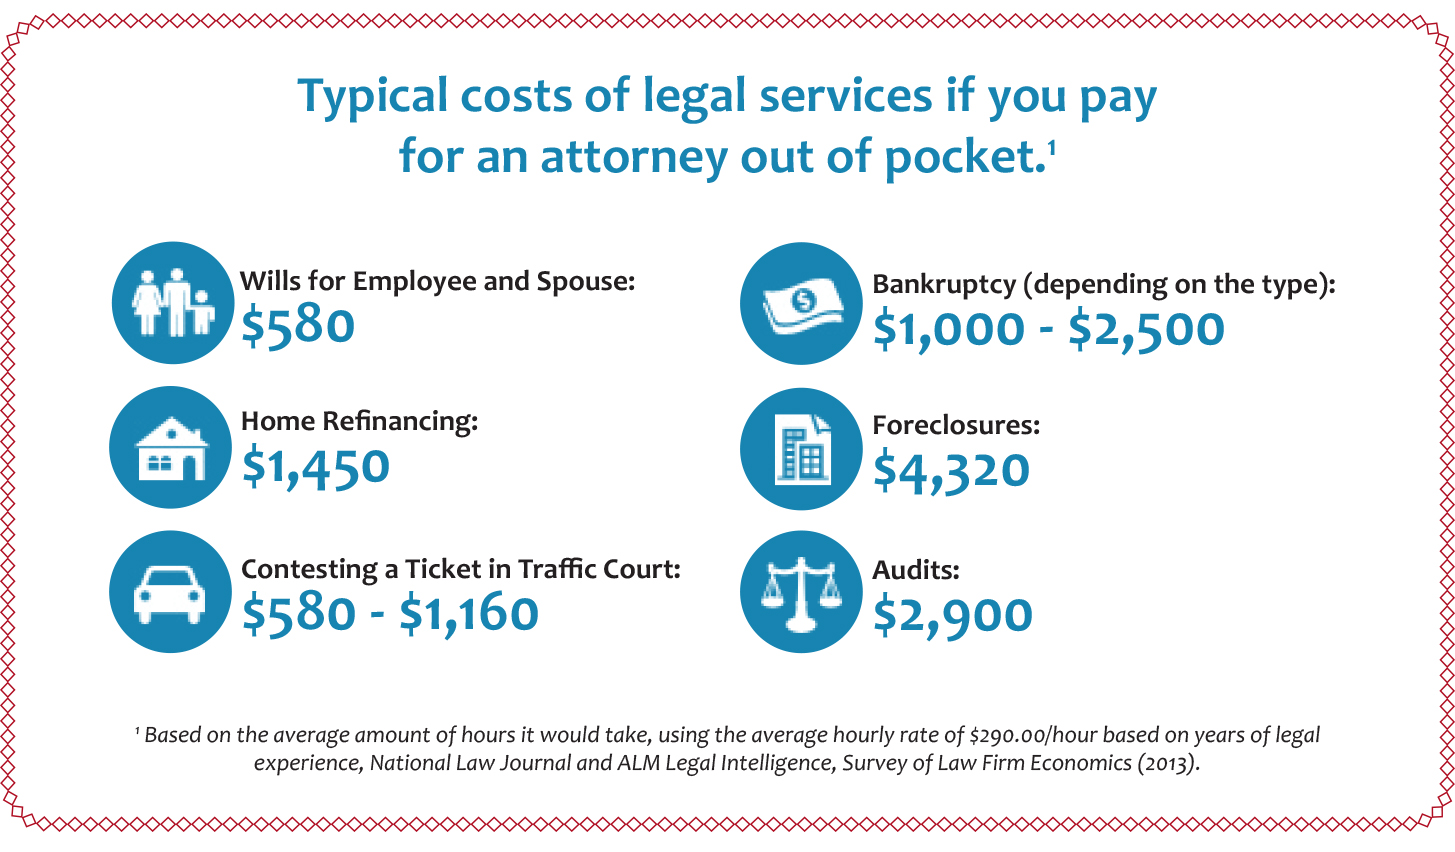 Typical costs of legal services